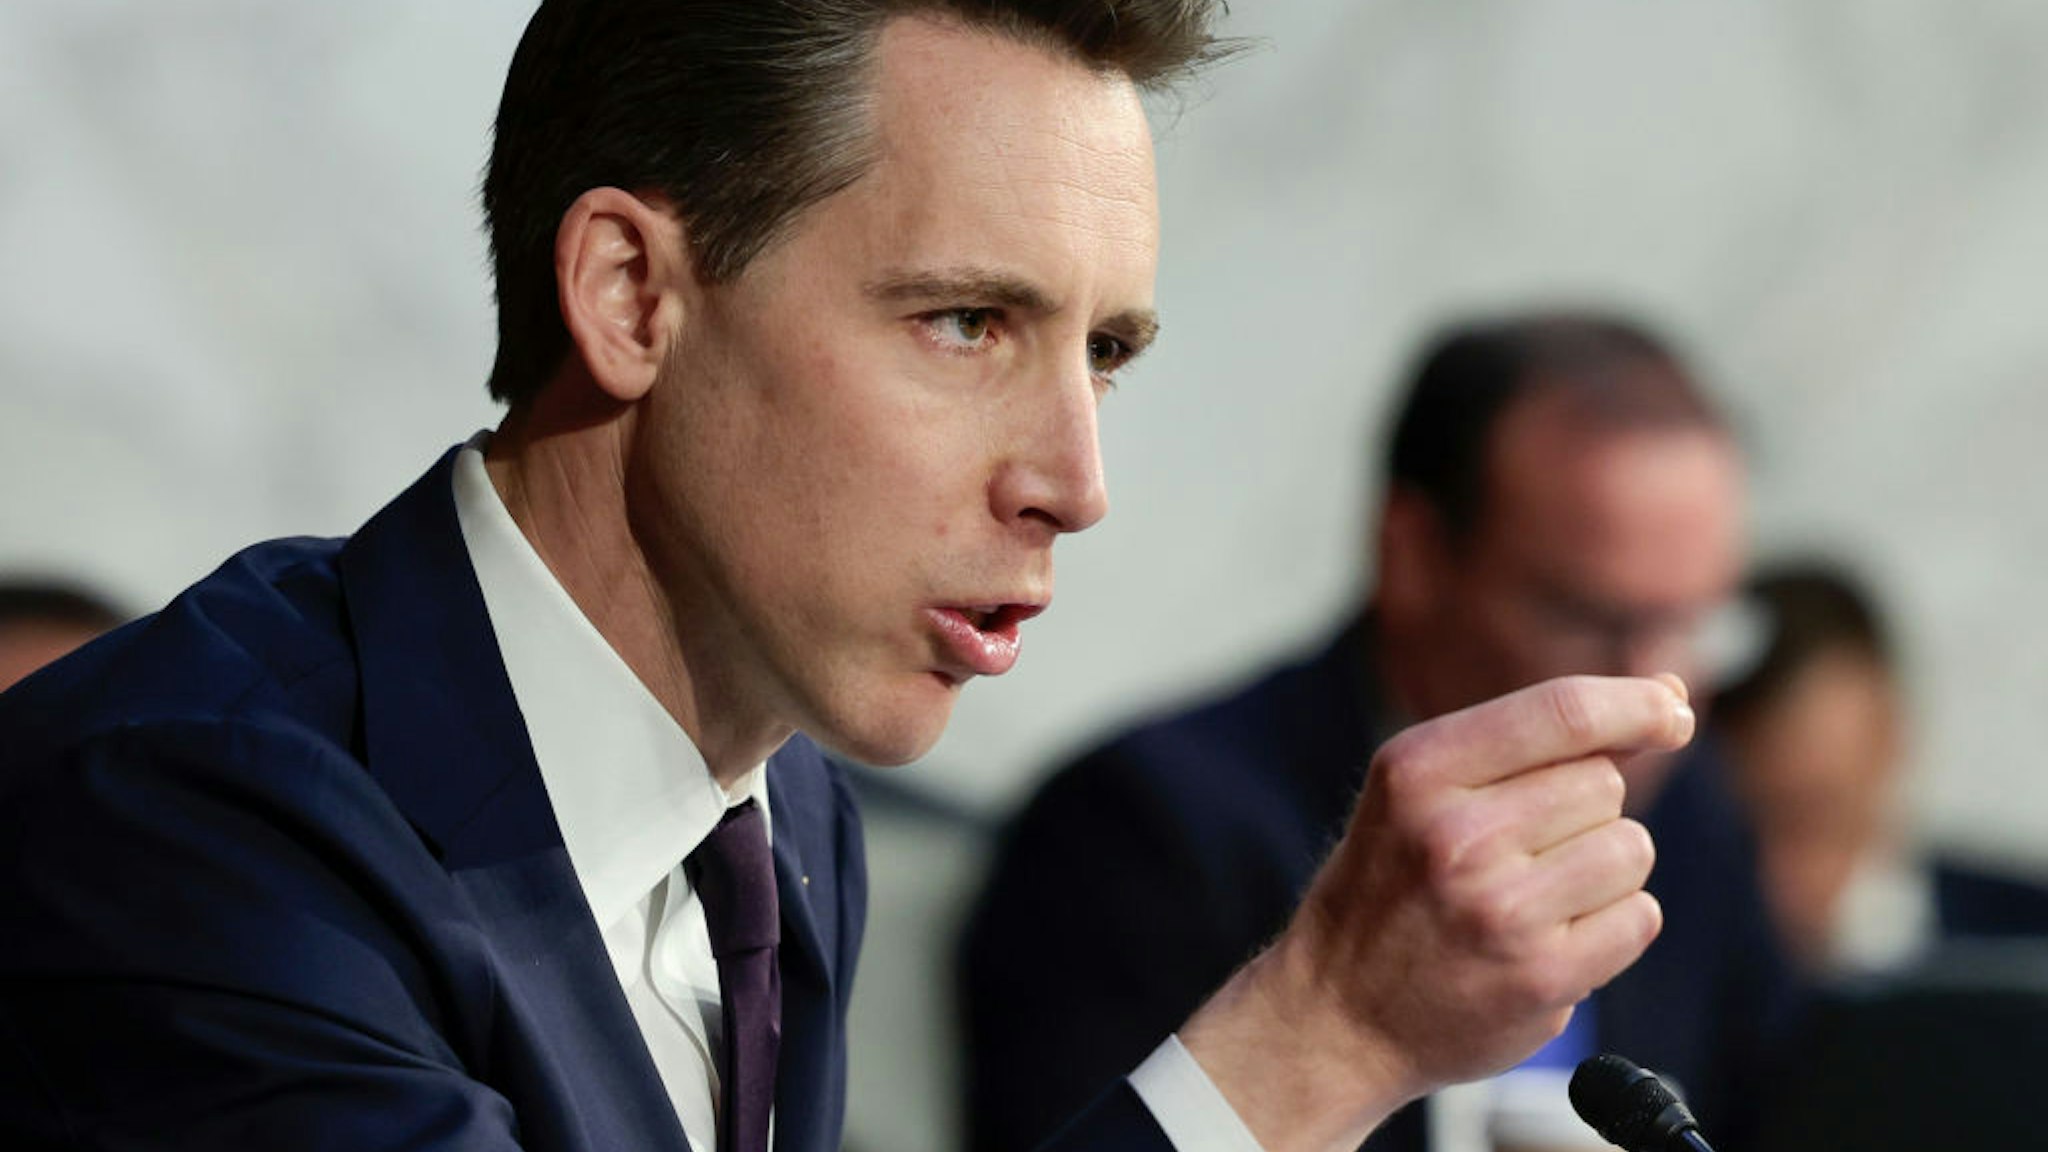 WASHINGTON, DC - APRIL 4: Sen. Josh Hawley (R-MO) speaks during a Senate Judiciary Committee business meeting to vote on Supreme Court nominee Judge Ketanji Brown Jackson on Capitol Hill, April 4, 2022 in Washington, DC. A confirmation vote from the full Senate will come later this week. (Photo by Anna Moneymaker/Getty Images).